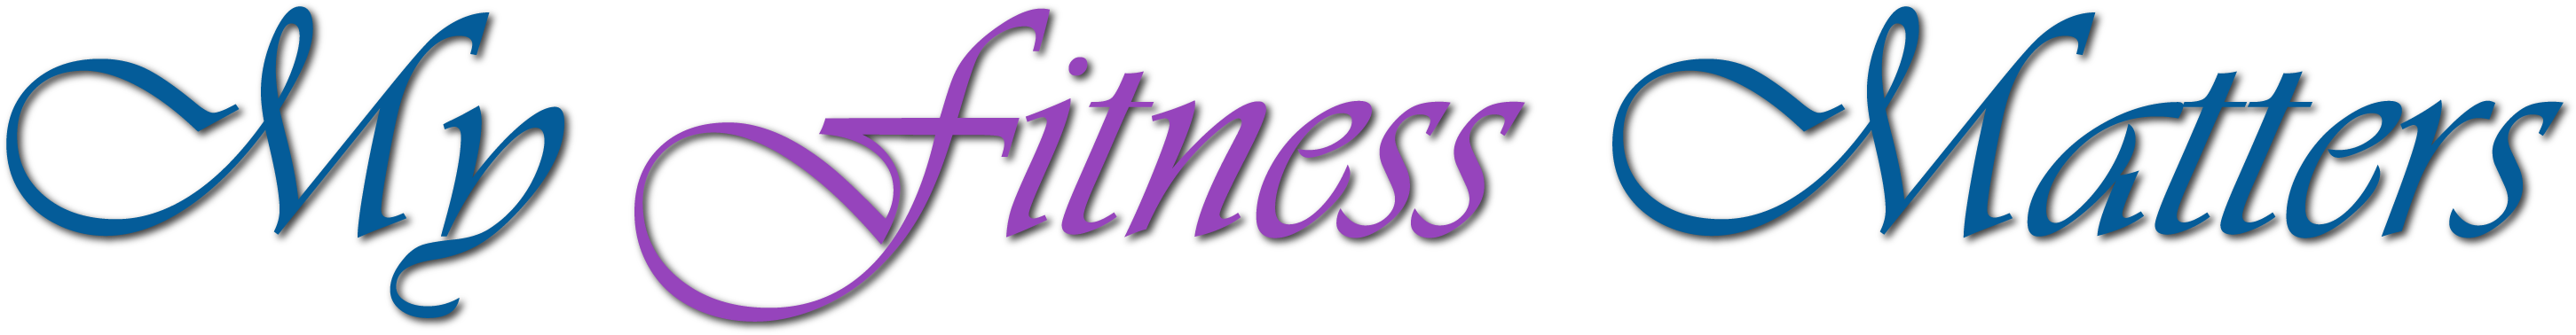 My Fitness Matters Logo and Home Page Anchor Link